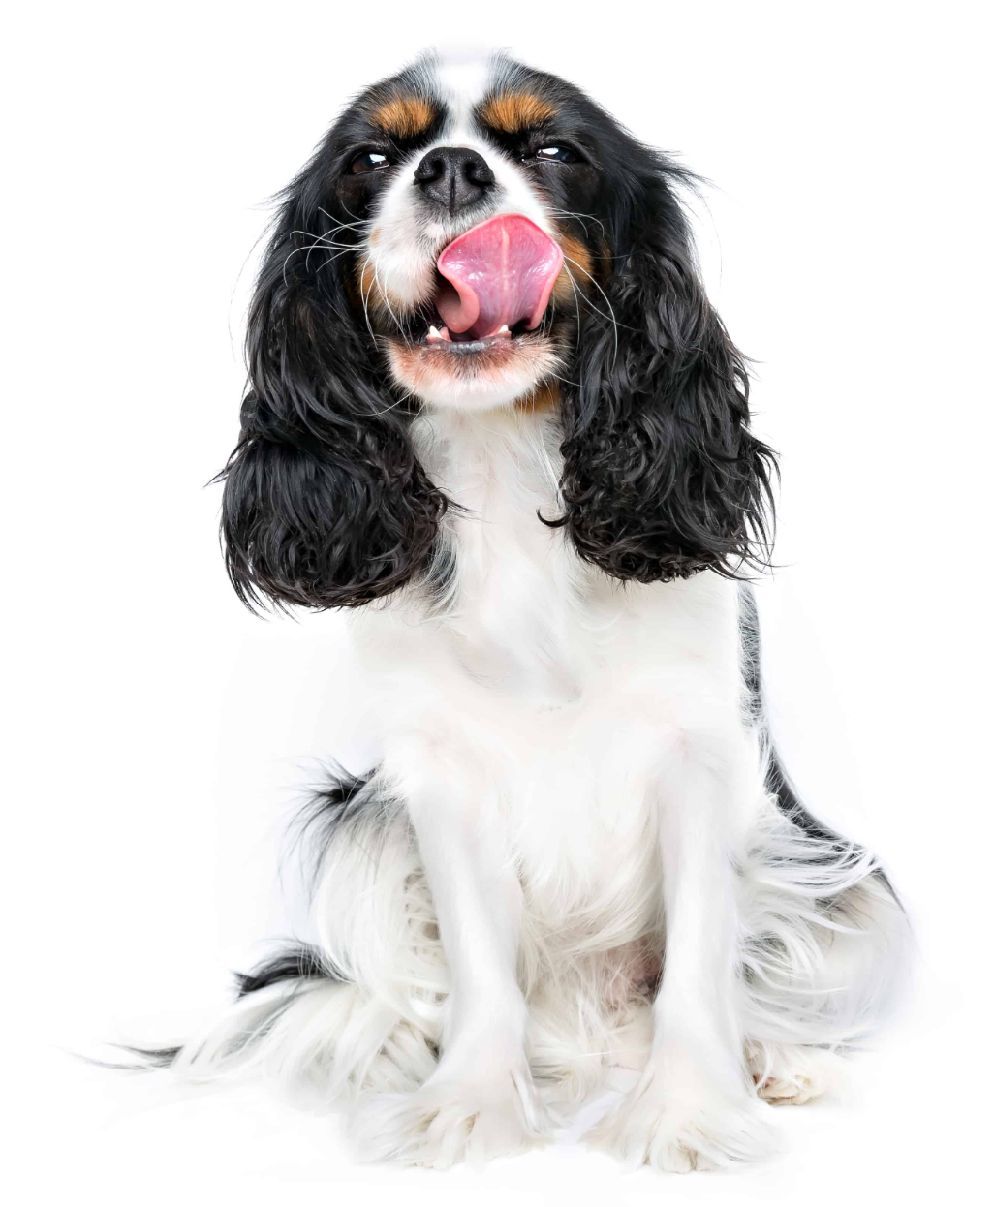 Dog licks are safe but try to limit that behavior because dog saliva has bacteria that can be harmful to humans.